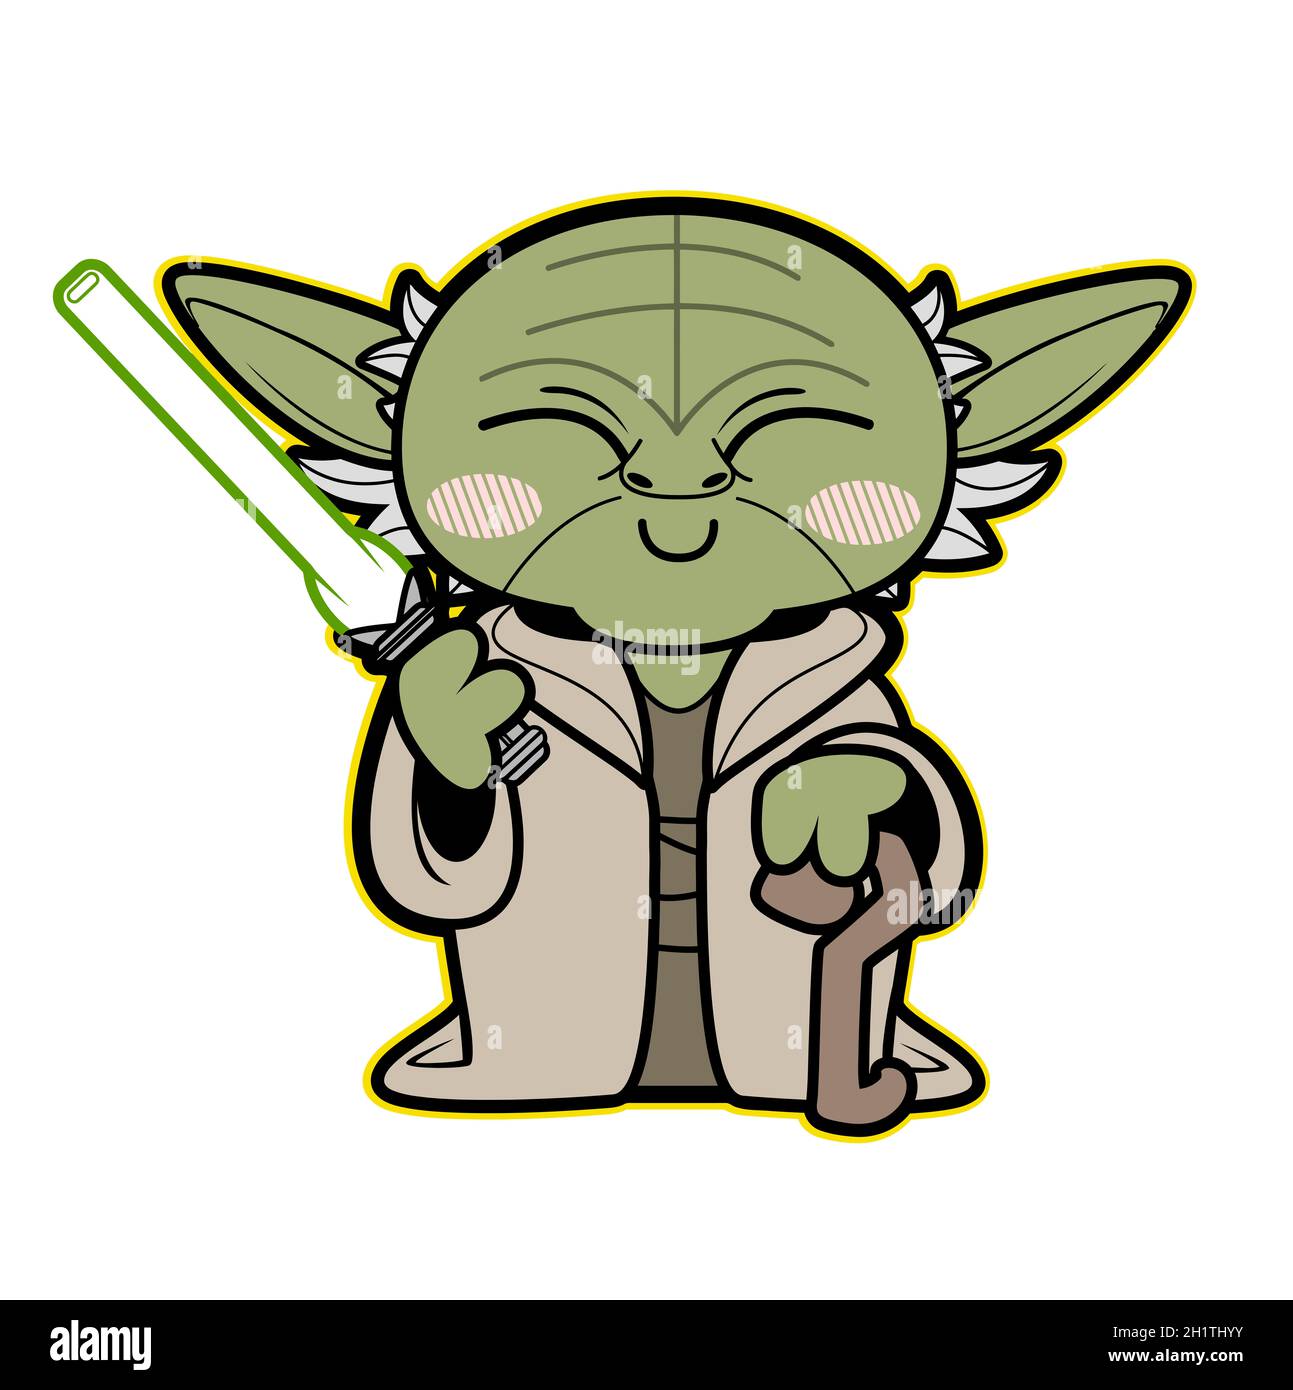 Yoda star wars illustration character   force whith you Stock Photo